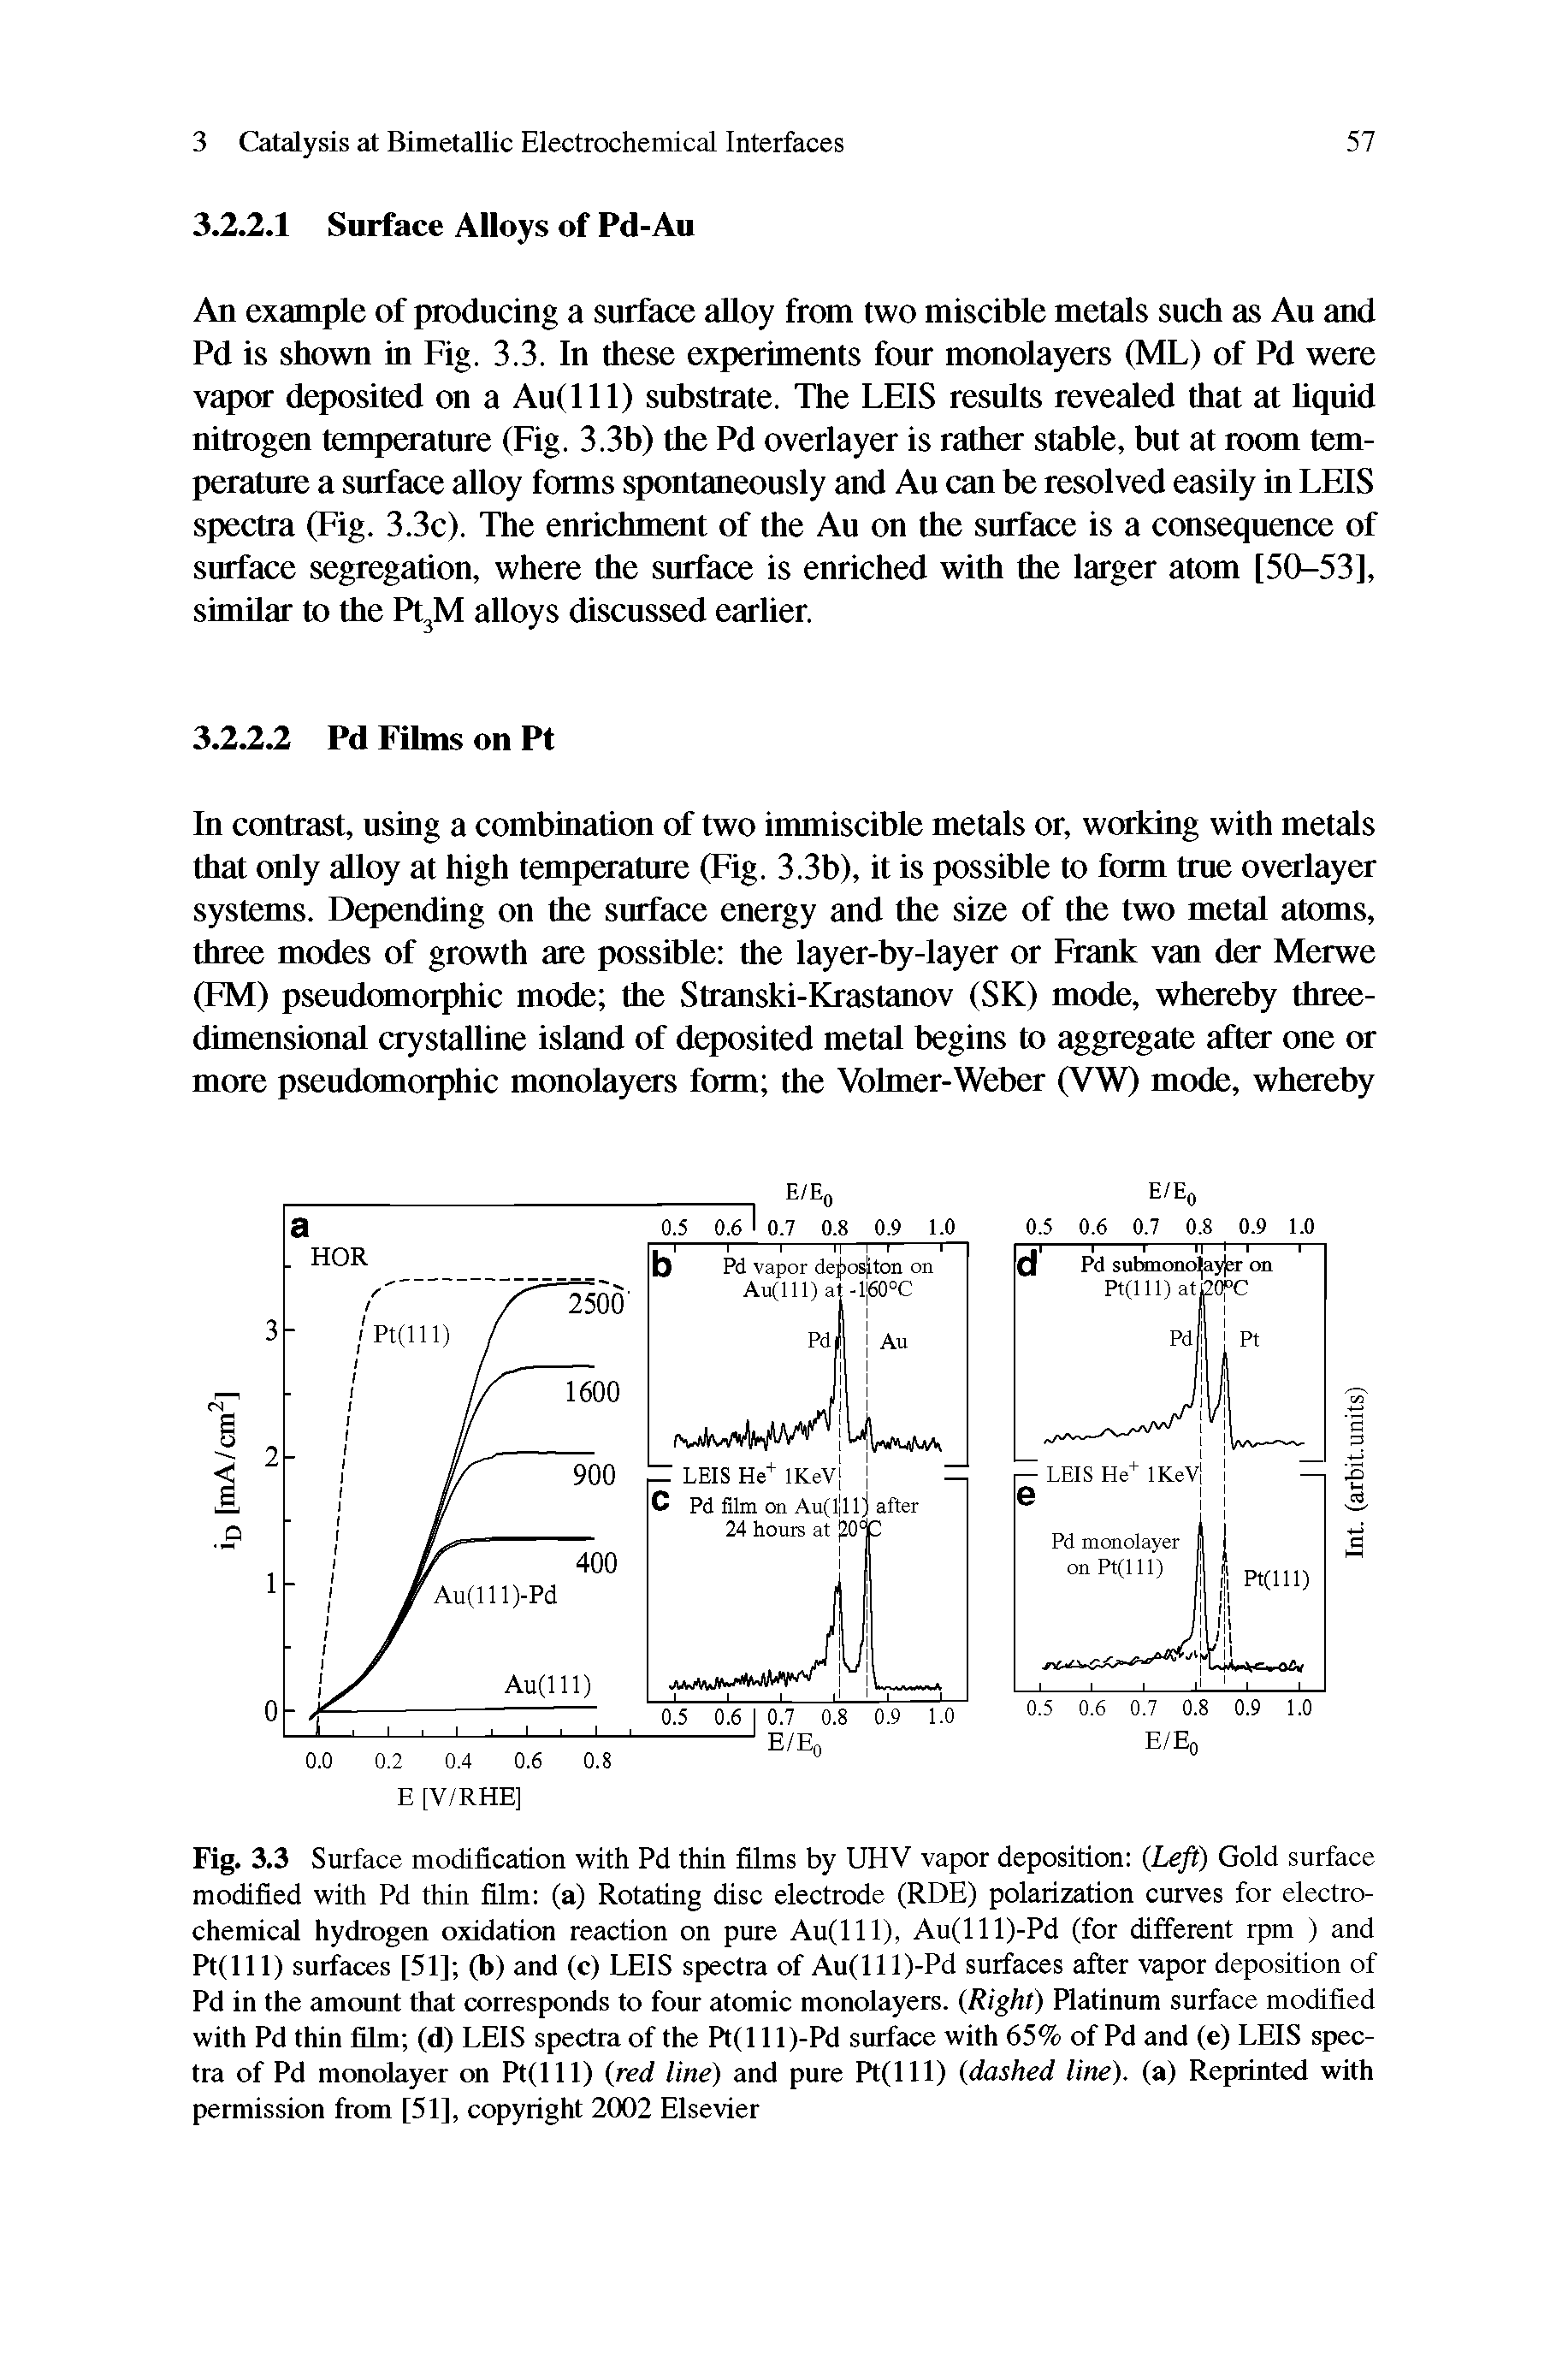 Fig. 3.3 Surface modification with Pd thin films by UHV vapor deposition (Left) Gold surface modified with Pd thin film (a) Rotating disc electrode (RDE) polarization curves for electrochemical hydrogen oxidation reaction on pure Au(lll), Au(lll)-Pd (for different rpm ) and Pt(lll) surfaces [51] (b) and (c) LEIS spectra of Au(lll)-Pd surfaces after vapor deposition of Pd in the amount that corresponds to four atomic monolayers. (Right) Platinum surface modified with Pd thin film (d) LEIS spectra of the Pt(l 11)-Pd surface with 65% of Pd and (e) LEIS spectra of Pd monolayer on Pt(lll) (red line) and pure Pt(lll) (dashed line), (a) Reprinted with permission from [51], copyright 2002 Elsevier...